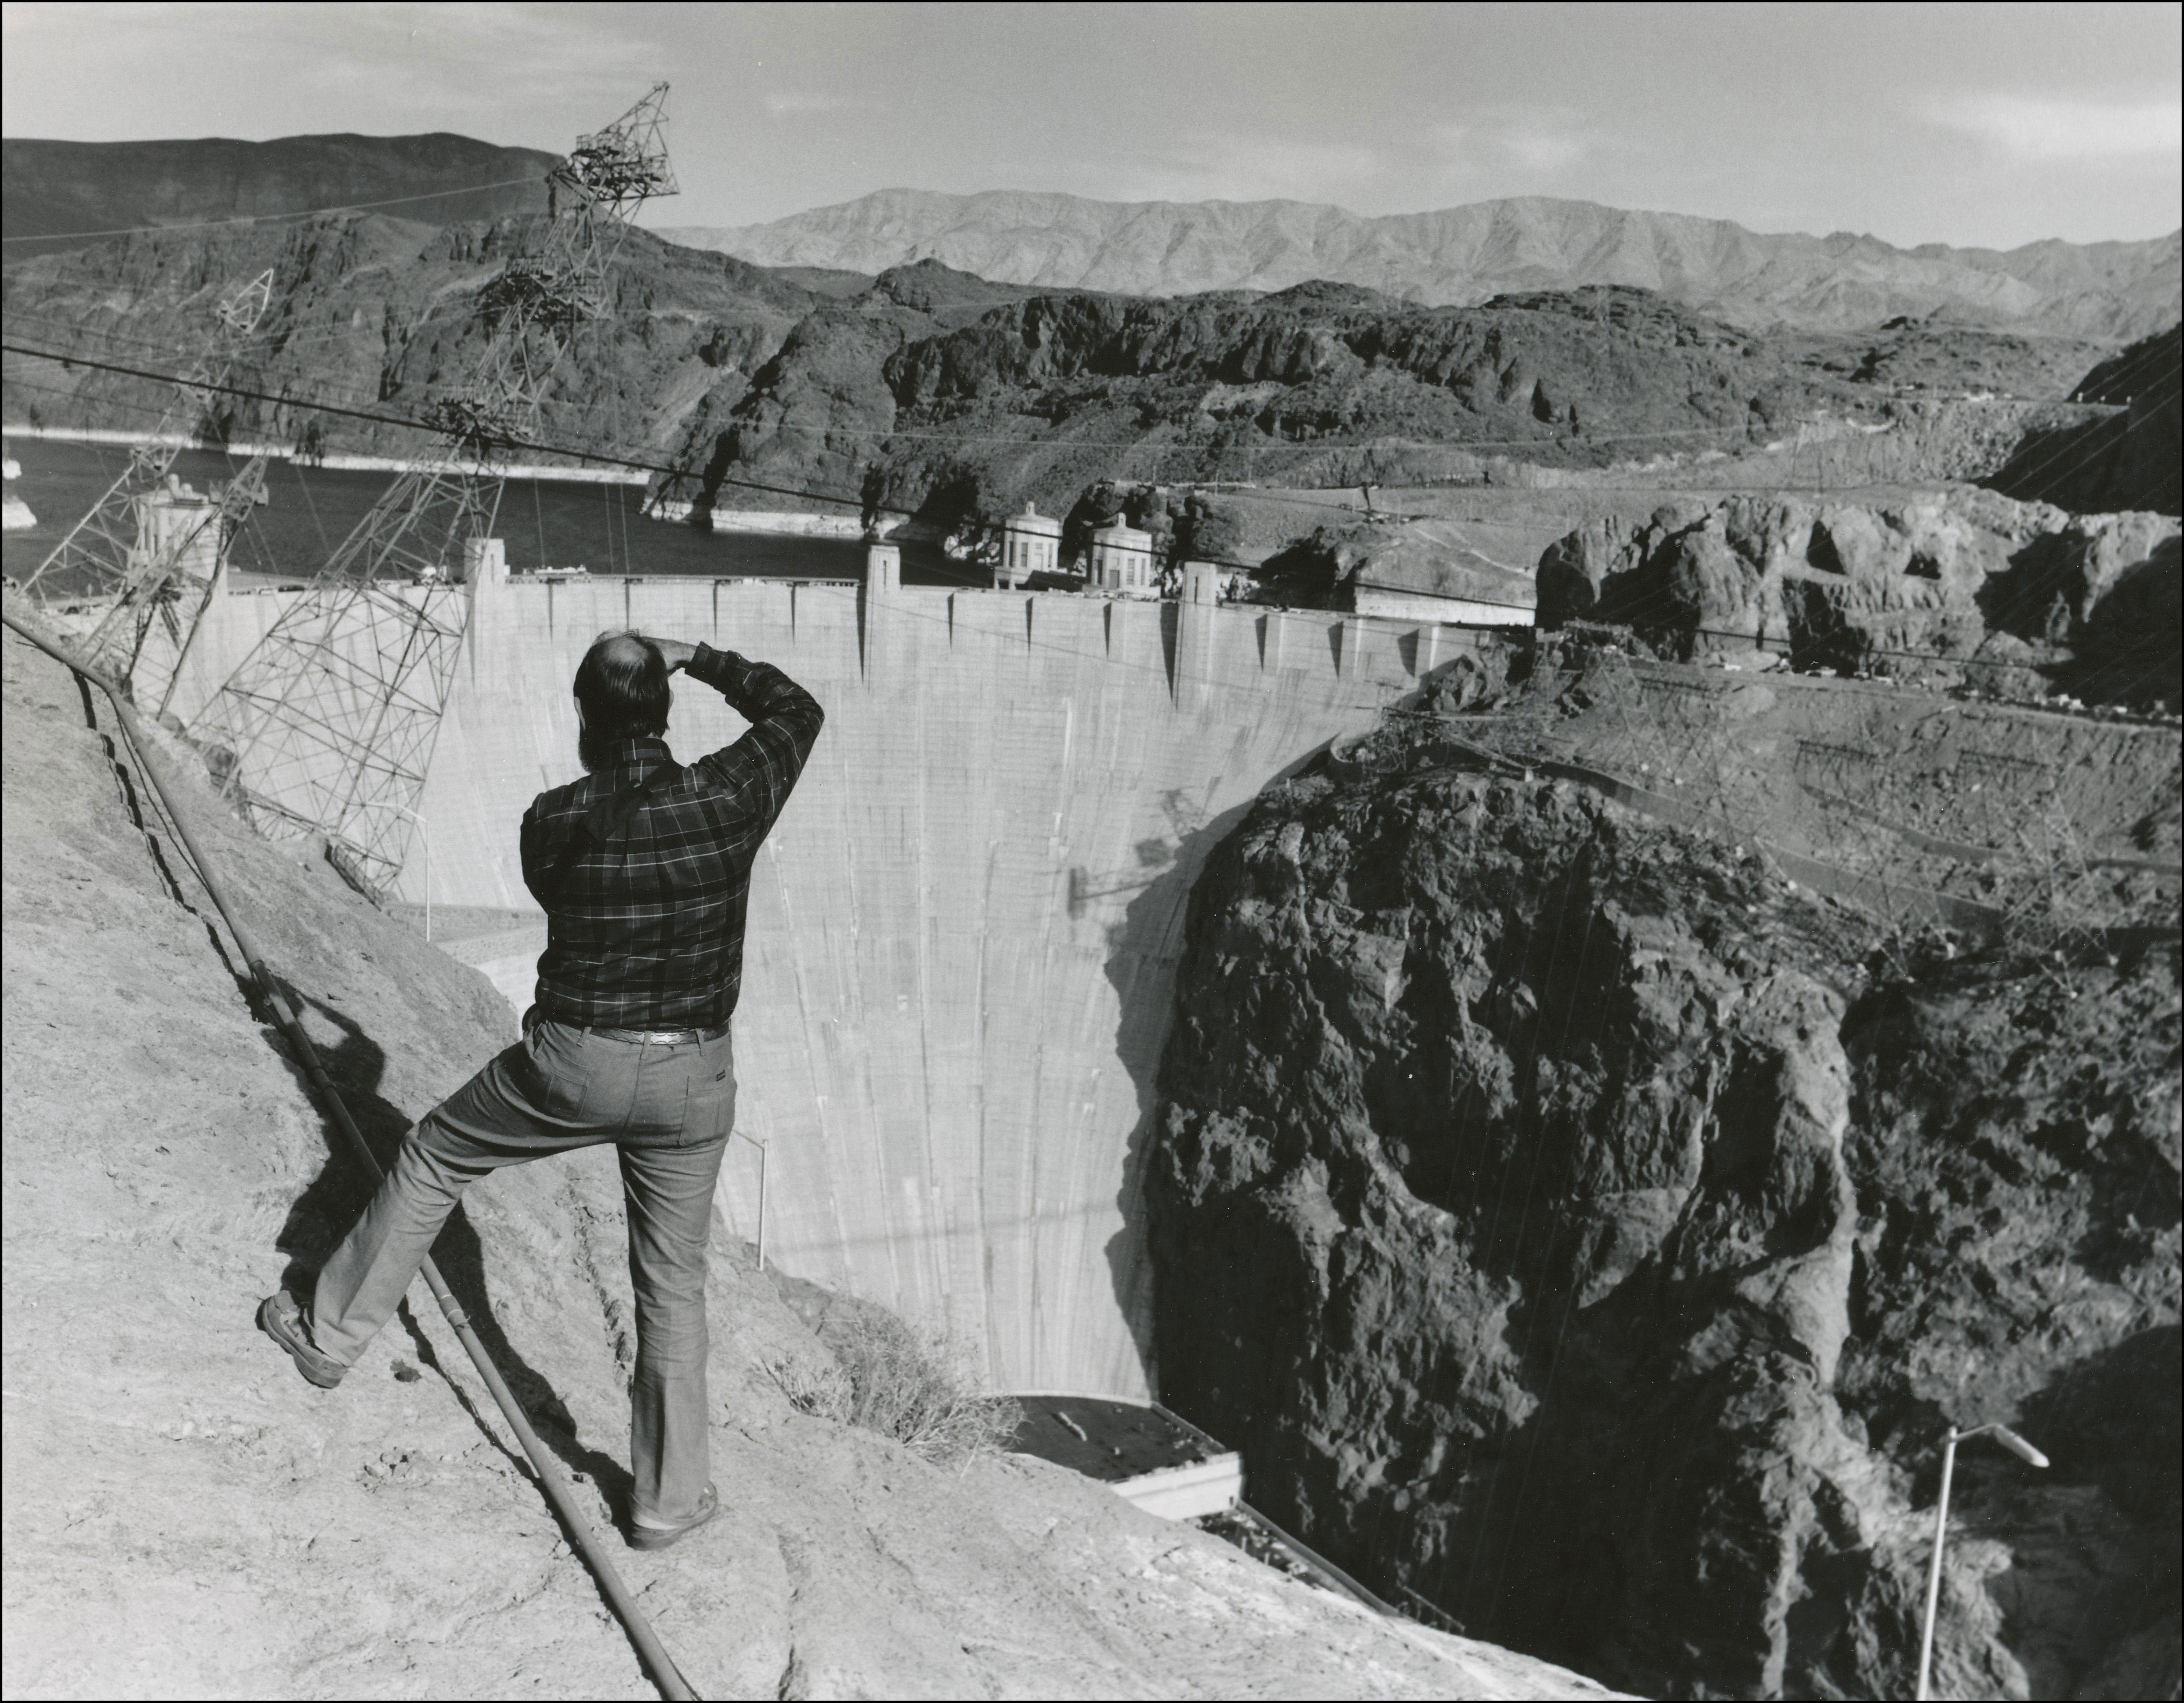 View of the back of a man standing taking a photo of hoover dam. Hoover dam in the background with water behind it.